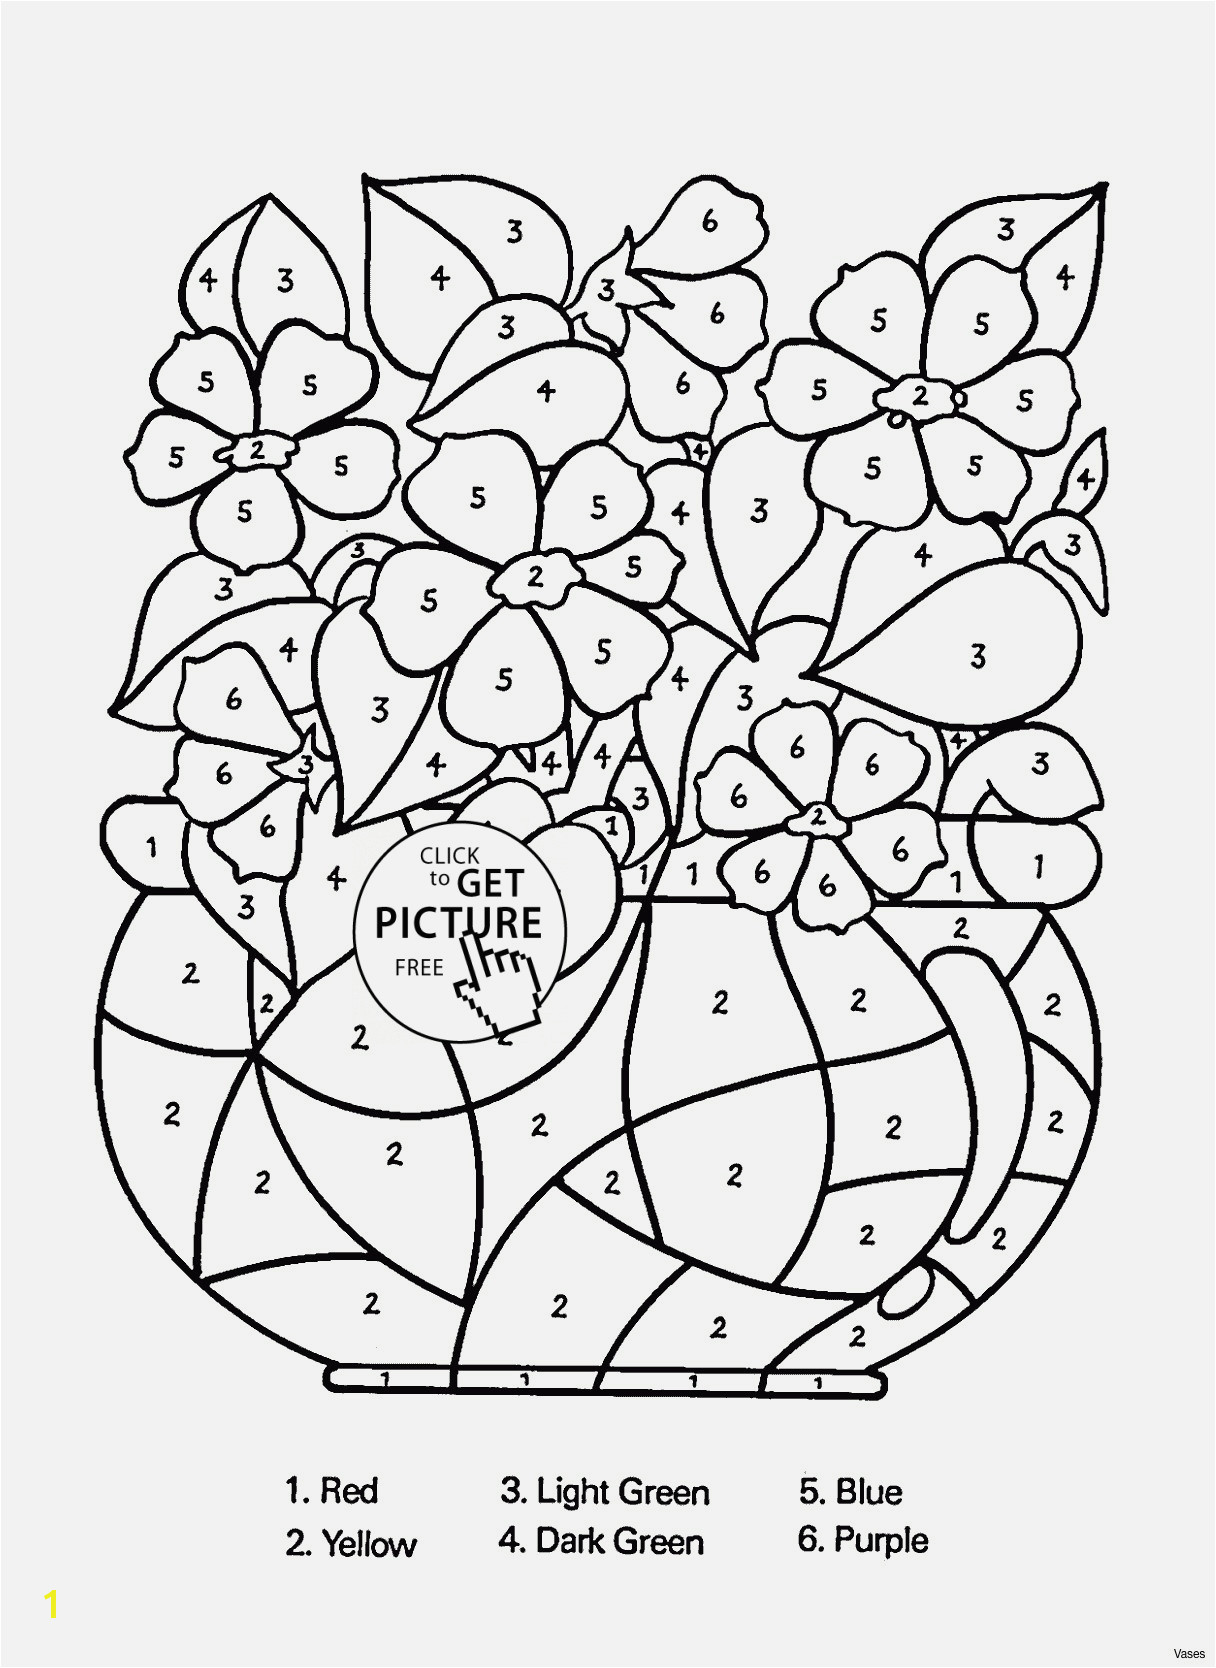 Free Pooh Bear Coloring Pages Free Coloring Pages for Kids Free Print the Color Page Model